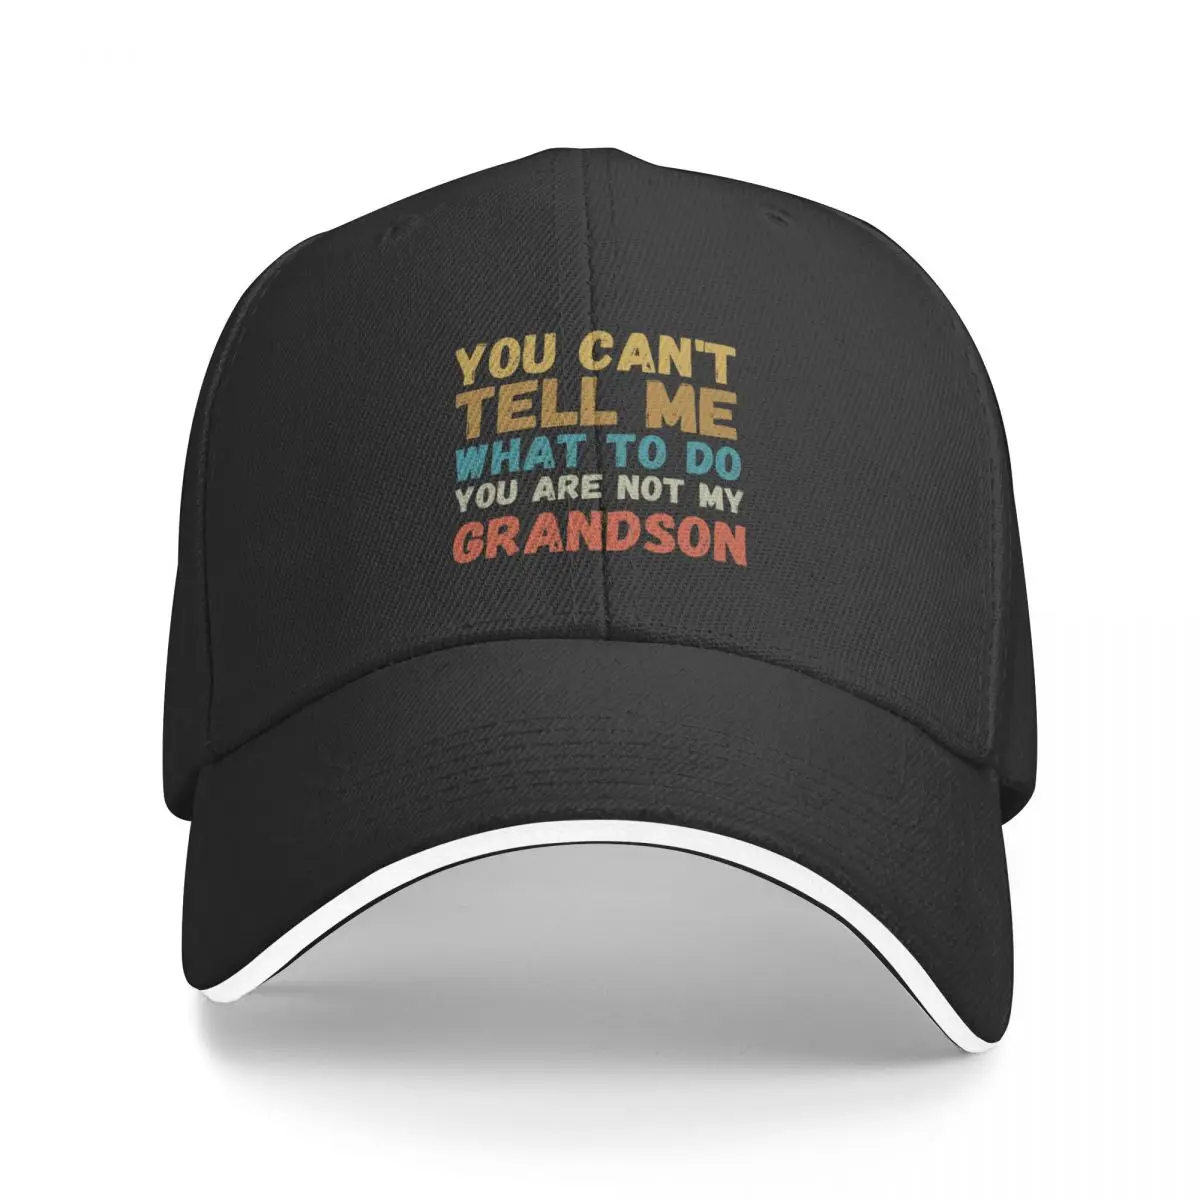 

New You Cant Tell Me What To Do Youre Not My Grandson Baseball Cap Golf dad hat Hats Man Women's